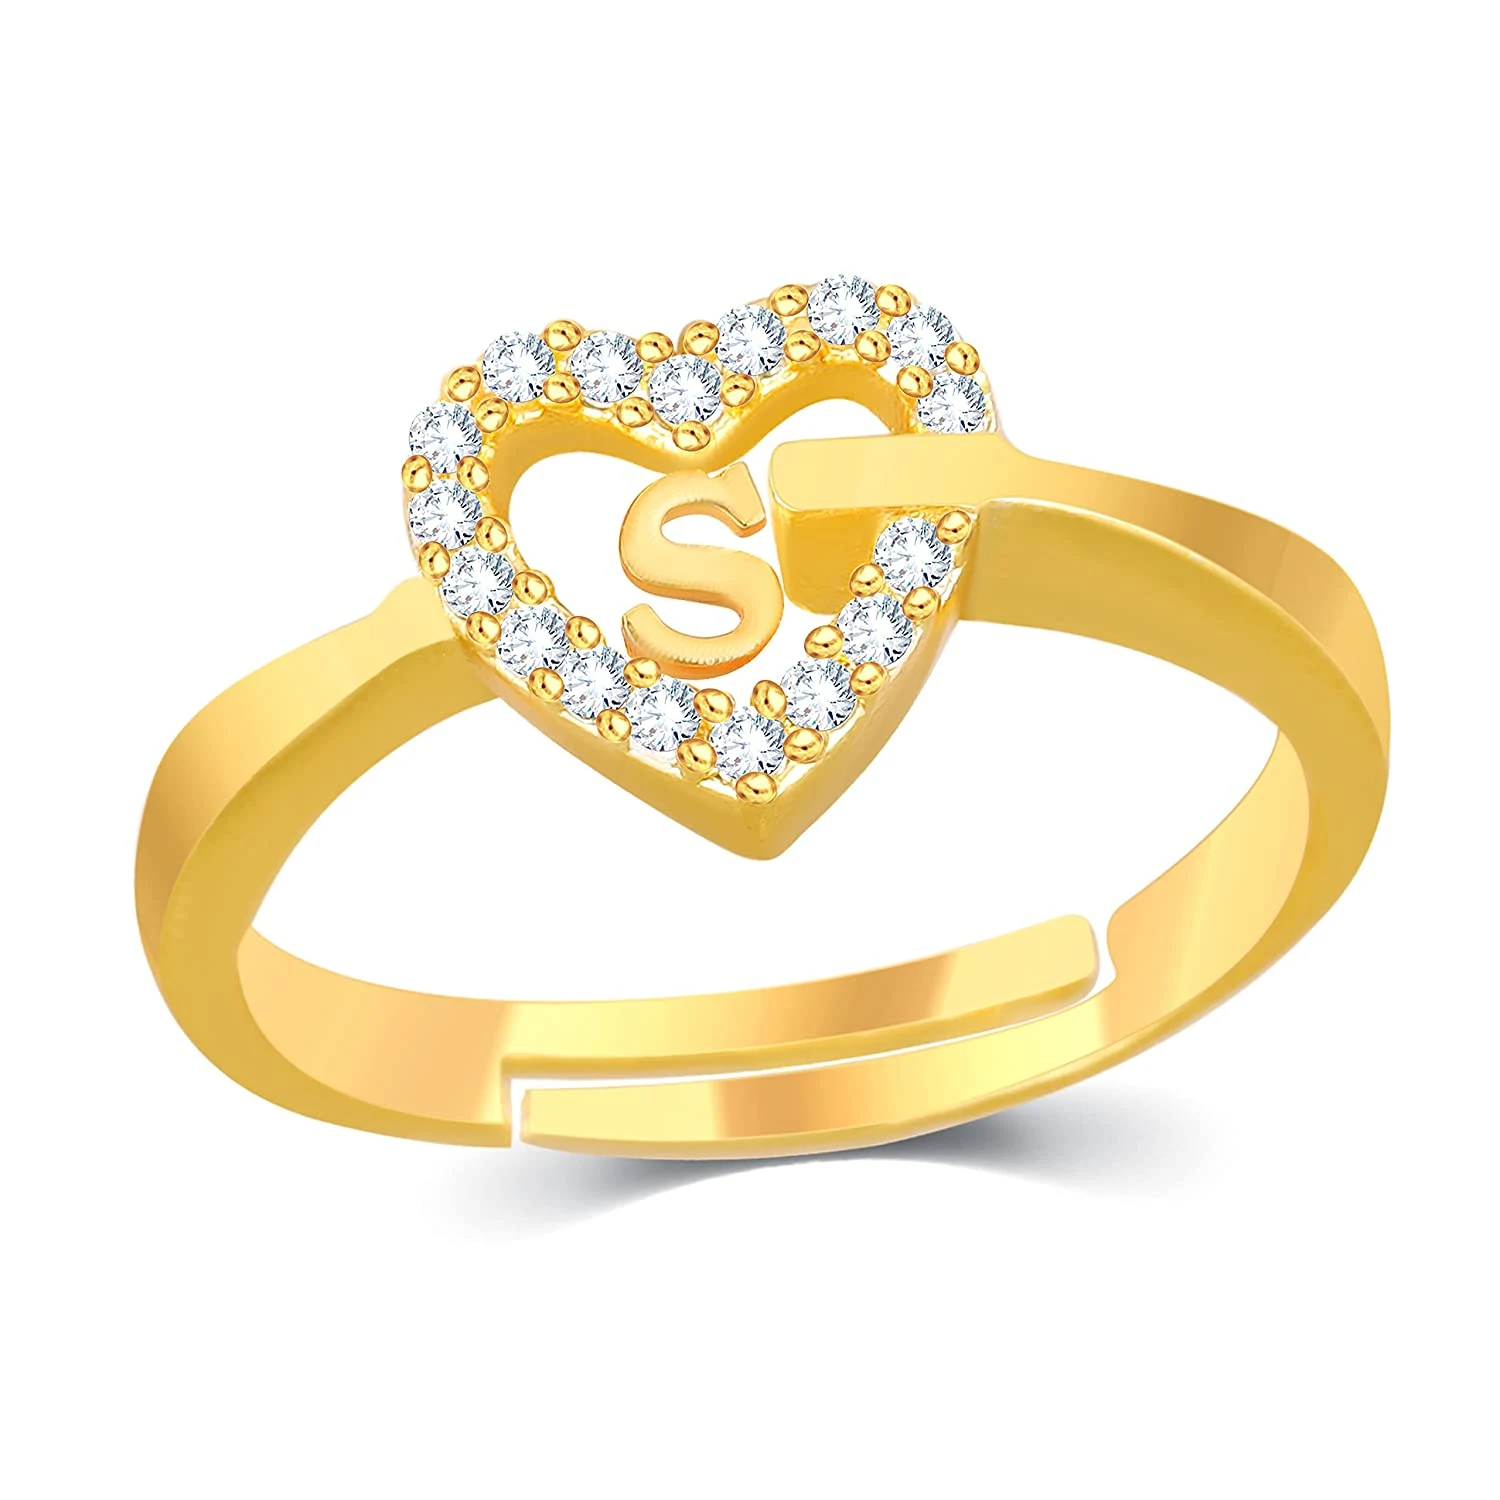 Love Ring Designs - Gold Ring Designs for Boys and Girls.  Ring Designs - Gold ring designs for girls - NeotericIT.com